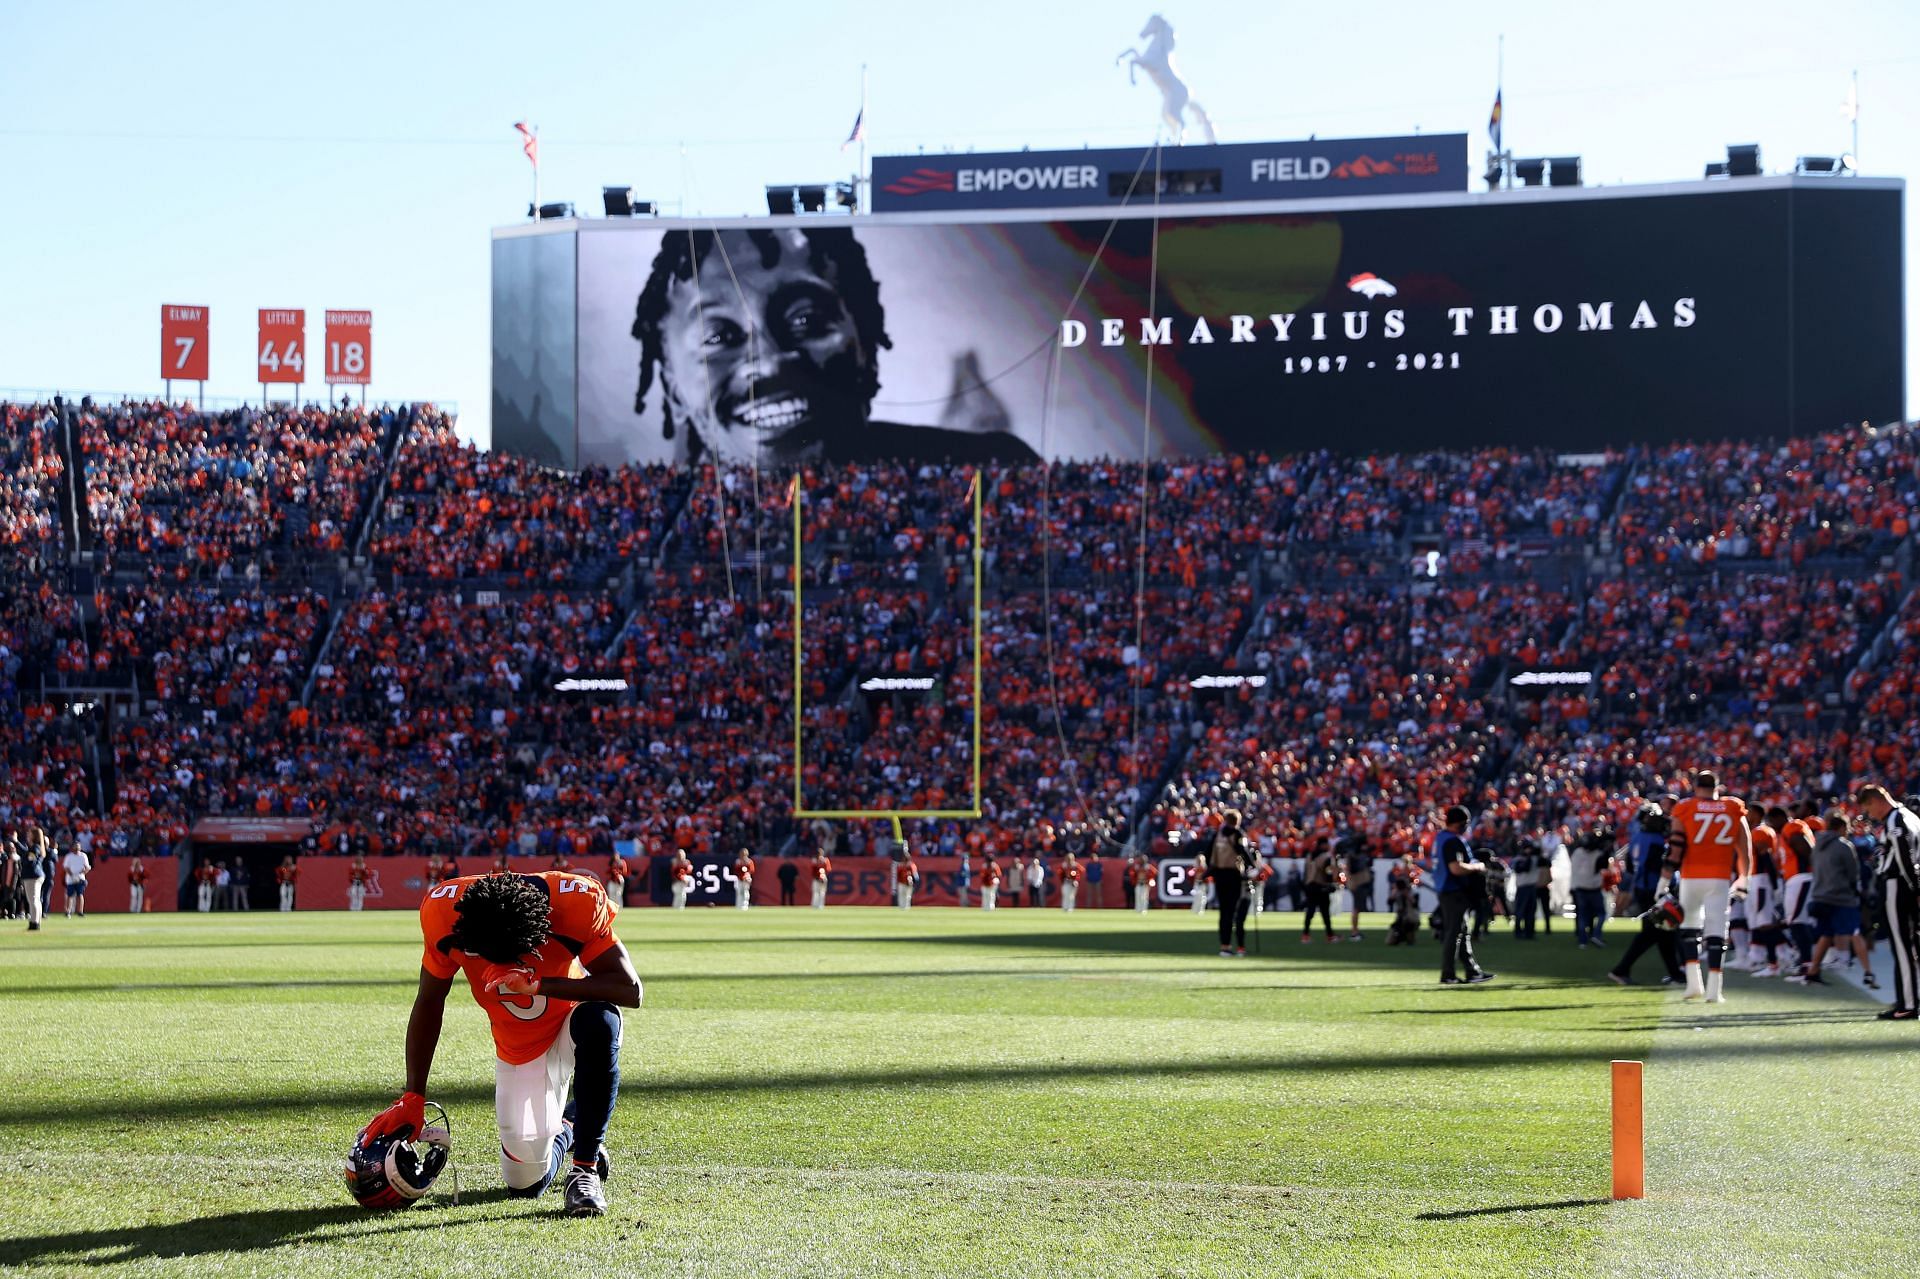 Tributes being paid to Demaryius Thomas at the Detroit Lions v Denver Broncos game